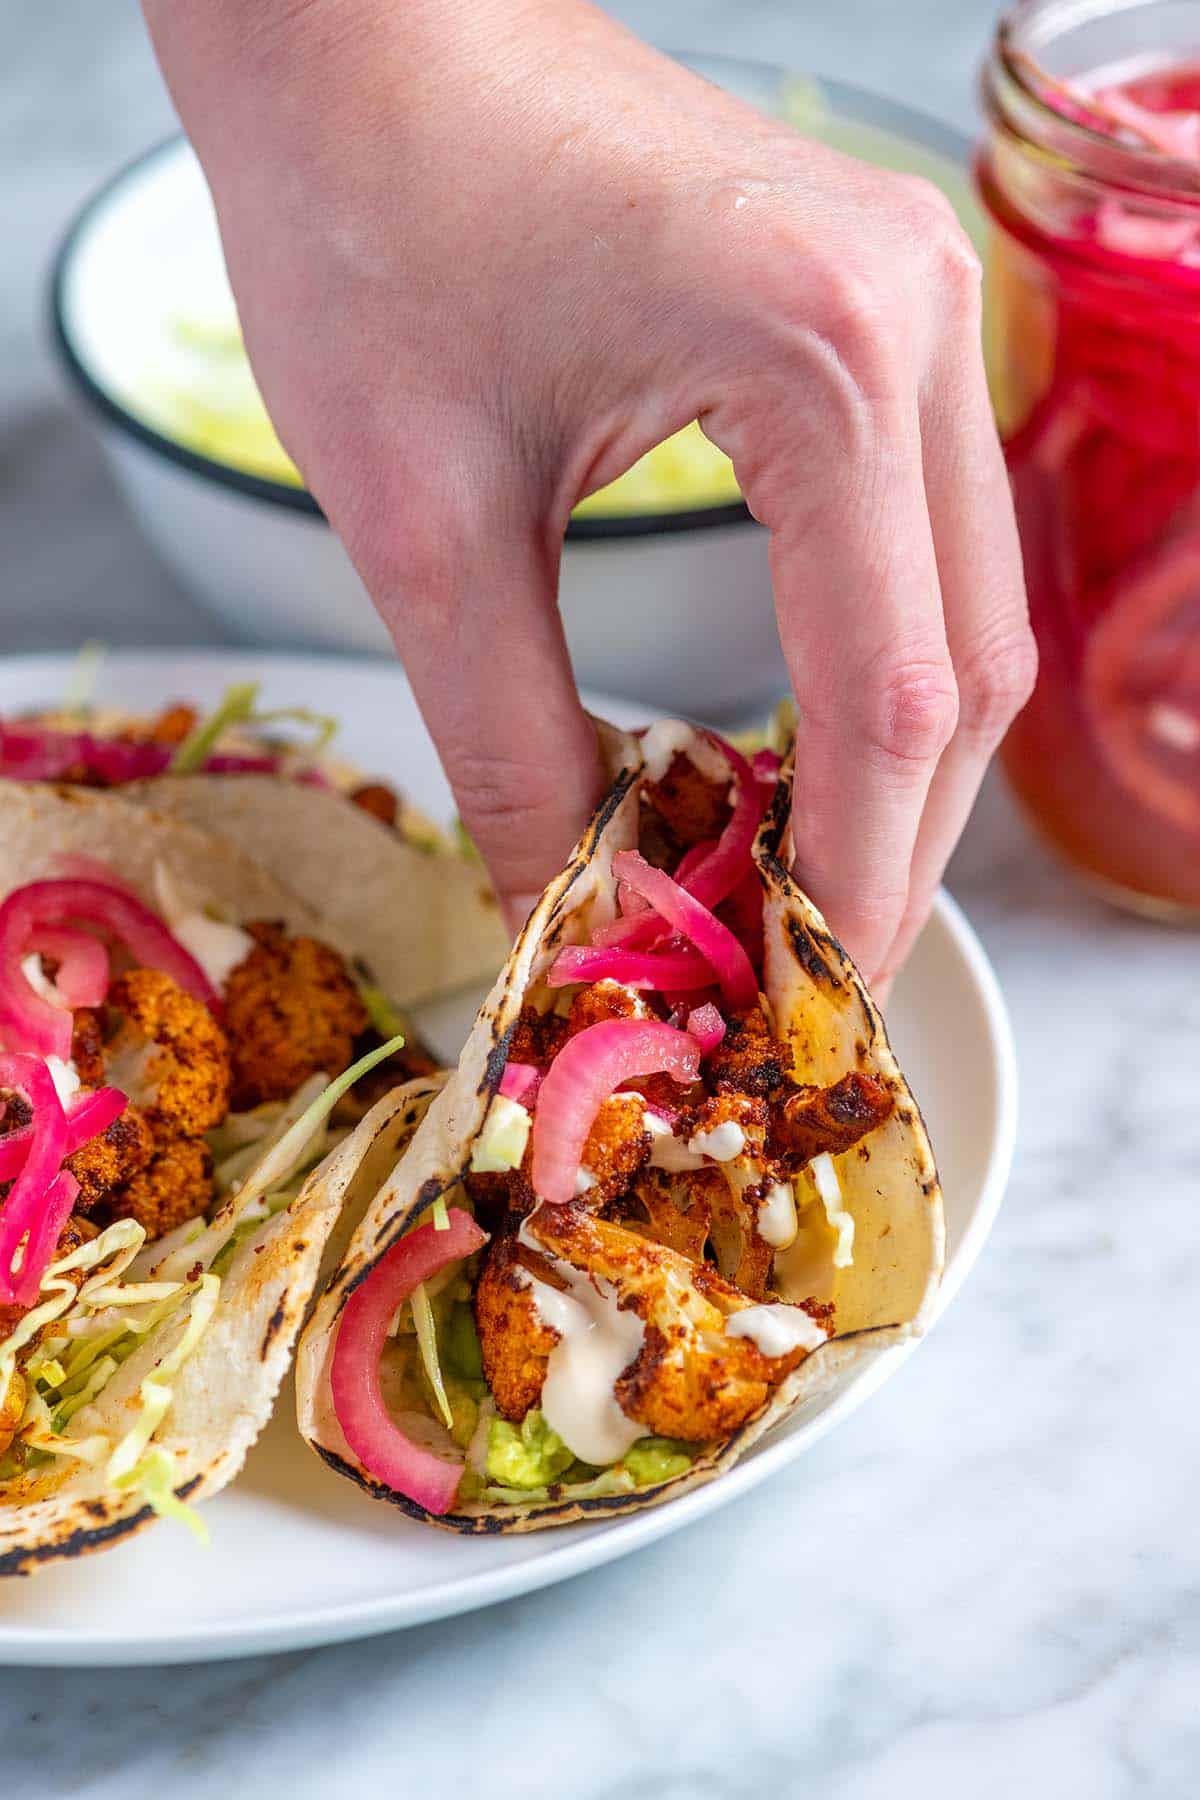 Grabbing a cauliflower taco with mashed avocado, roasted cauliflower, and pickled onions.